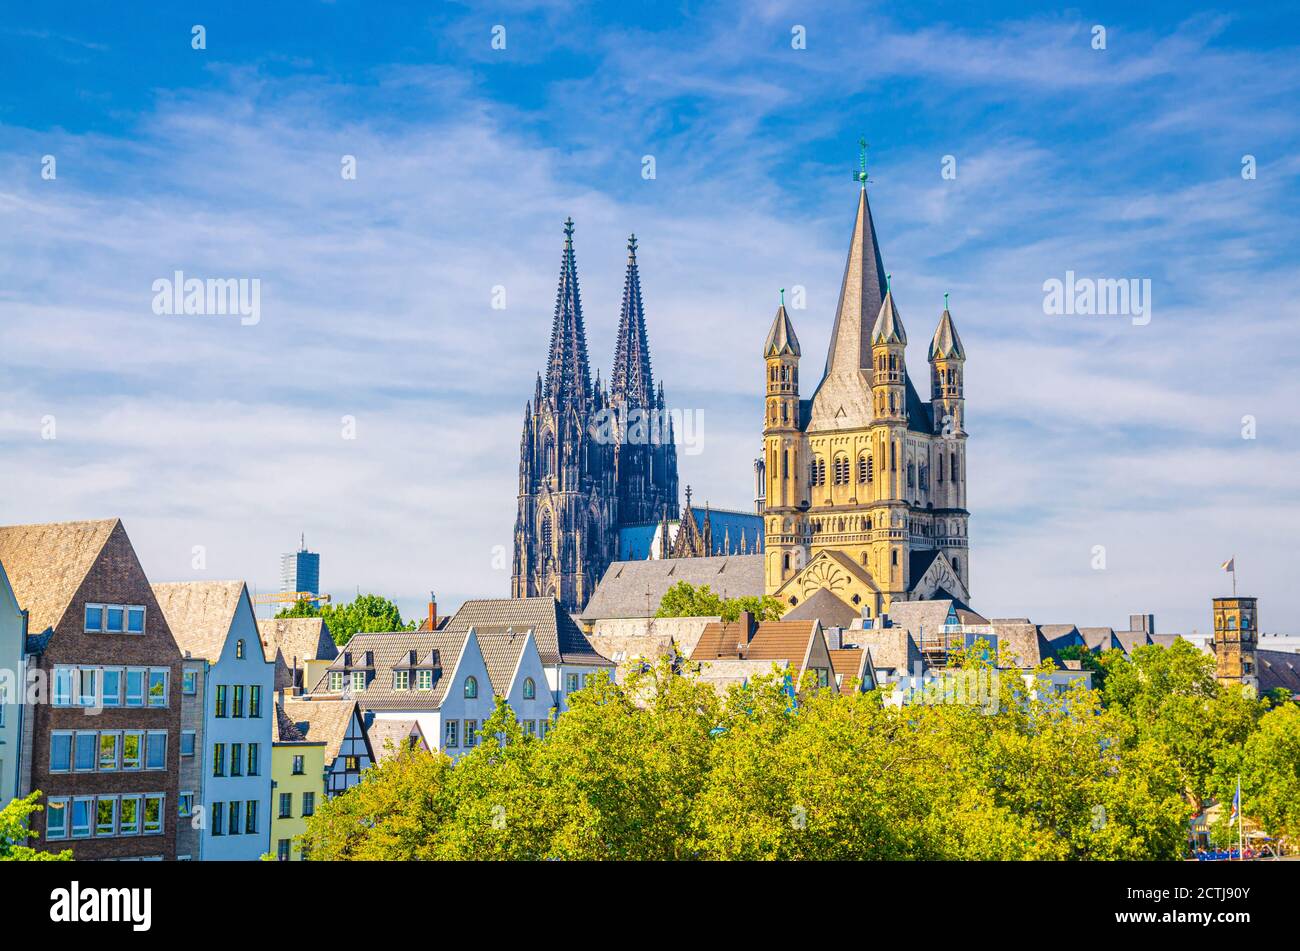 View of historical city centre with towers of Cologne Cathedral of Saint Peter, Great Saint Martin Roman Catholic Church buildings and roofs of colorful houses, North Rhine-Westphalia, Germany Stock Photo